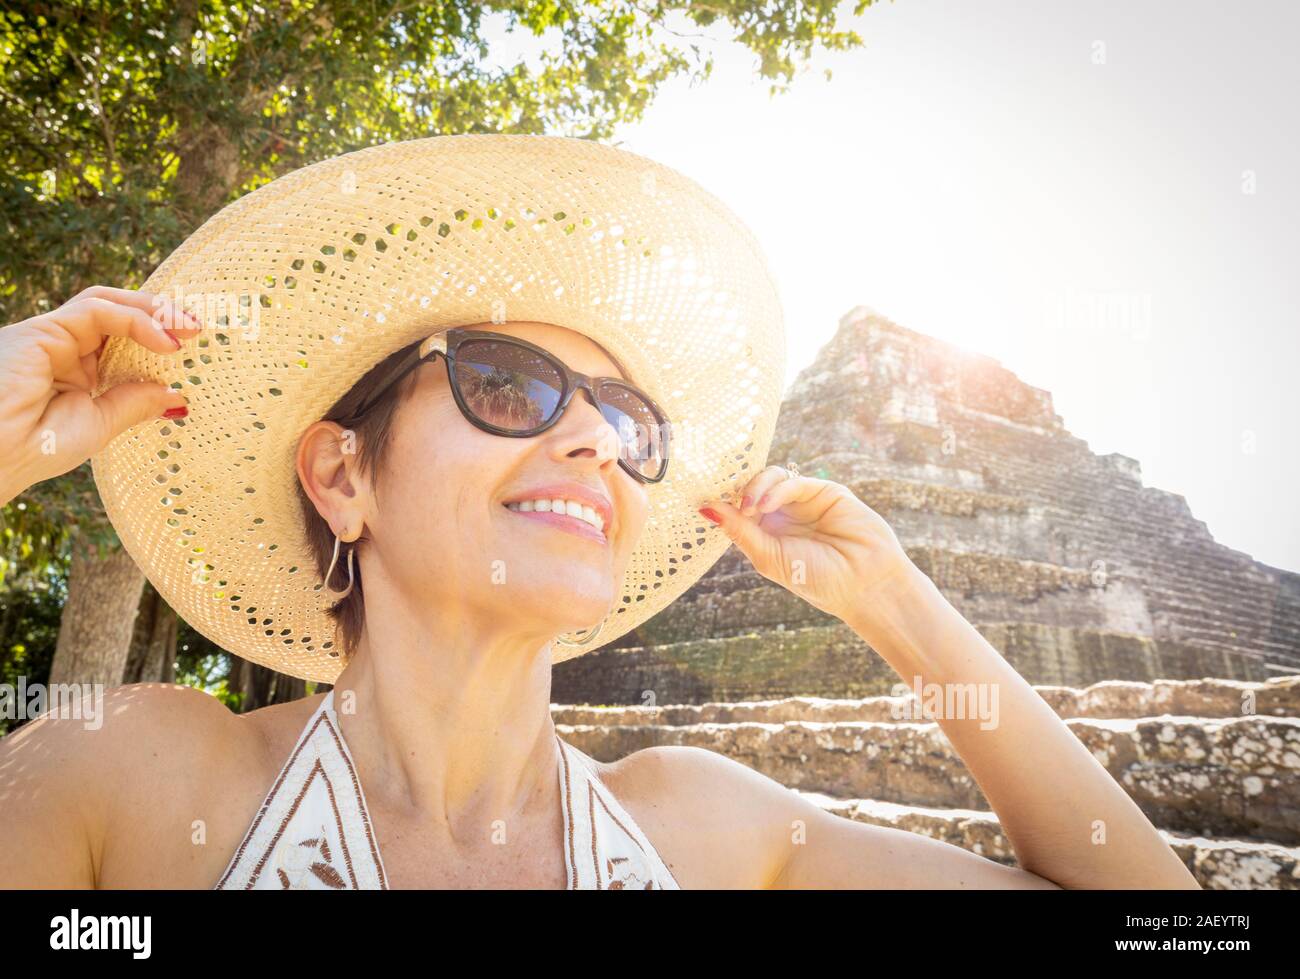 A female tourist at the Mayan ruins of Chaacchoben, Quintana Roo, Mexico. Stock Photo